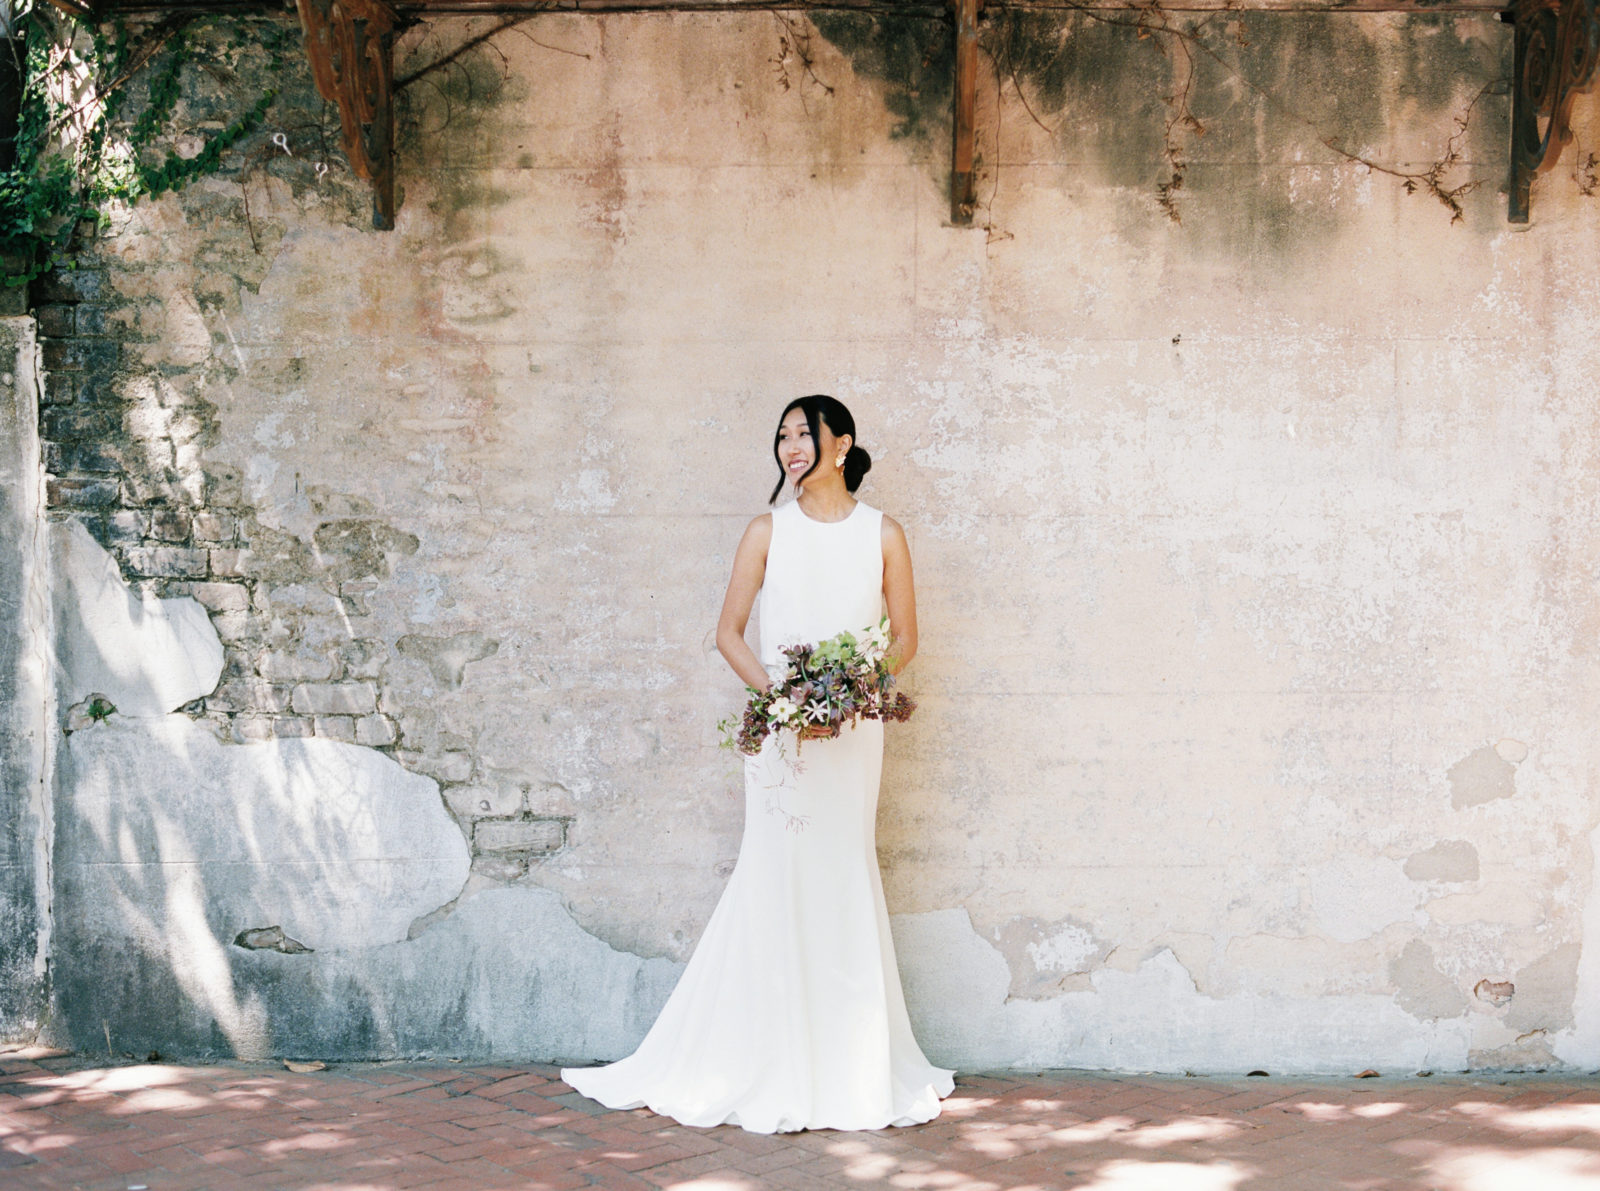 Bride smiles while holding organic bouquet for a portrait during her old world-inspired elopement in Savannah, Georgia.